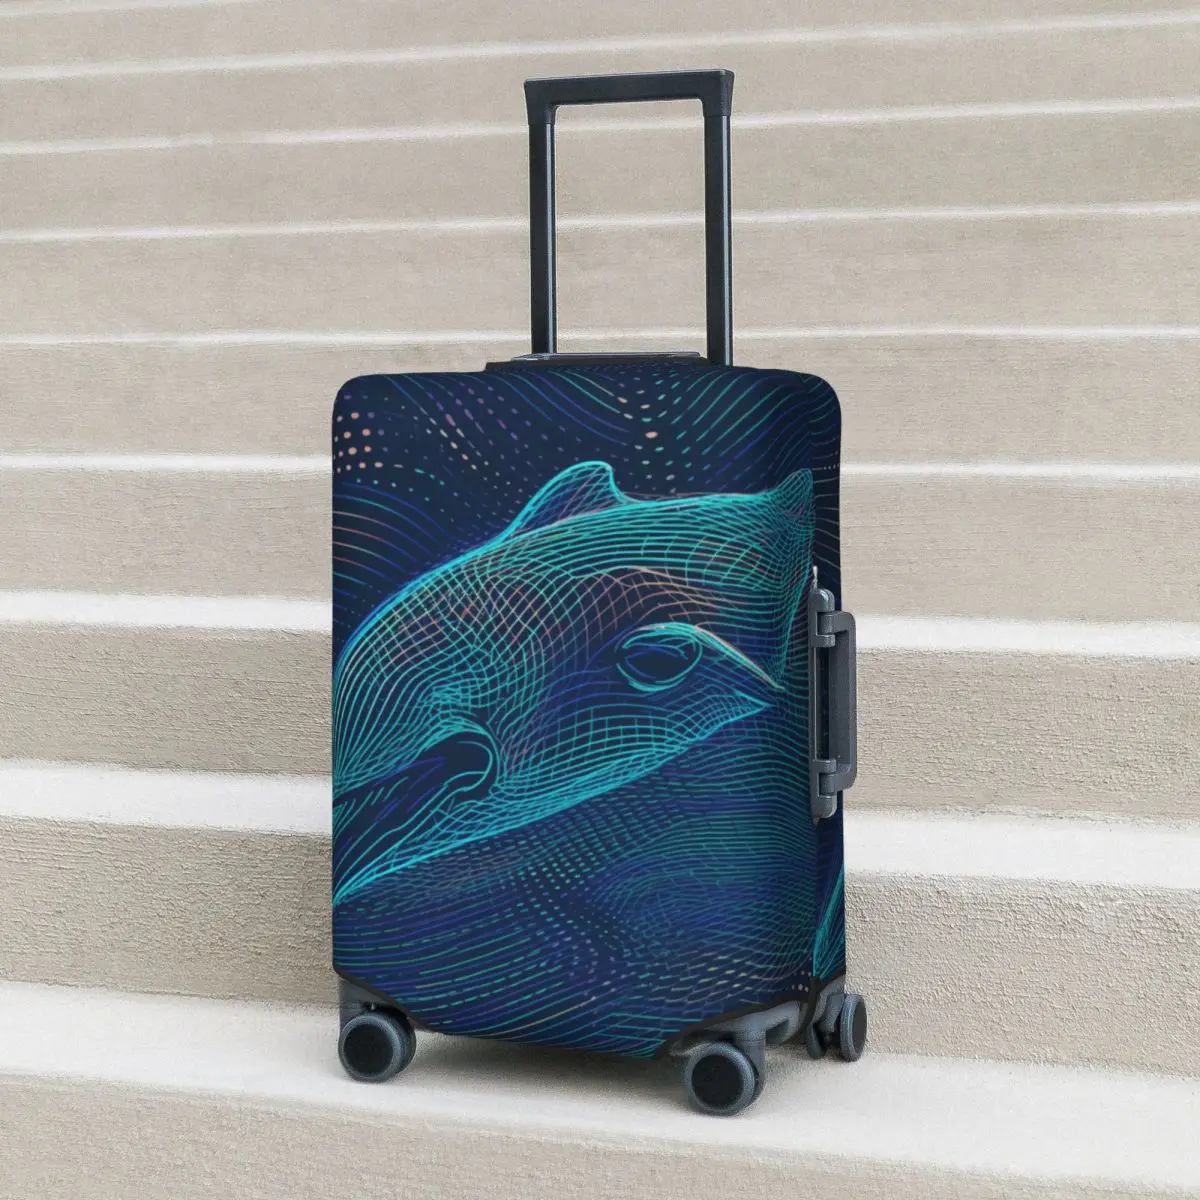 

Dolphin Suitcase Cover Portraits Psychedelic Lines Strectch Travel Protector Luggage Accesories Holiday